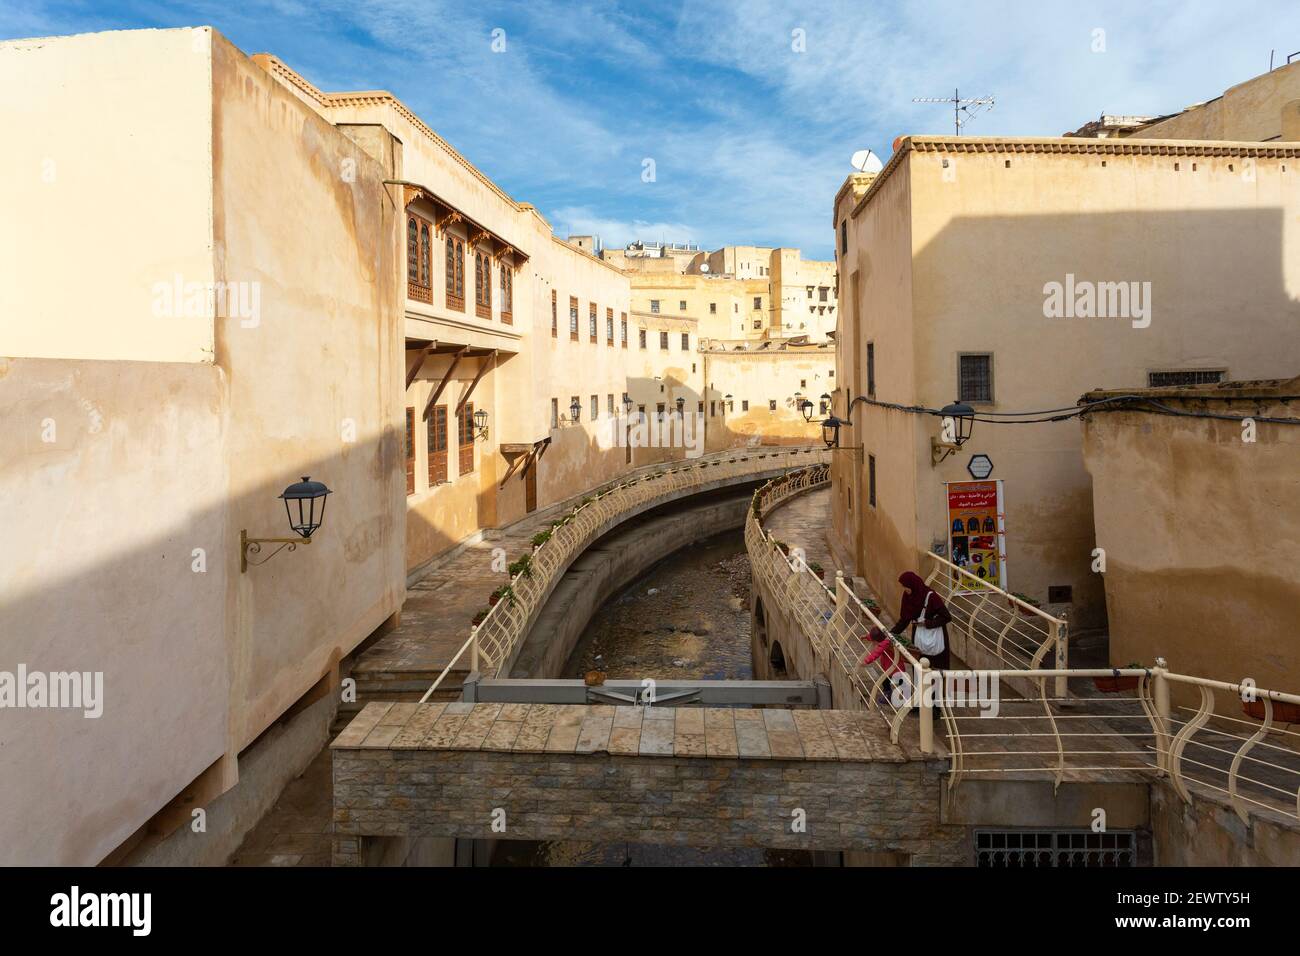 View of the Oued Bou Khrareb river and surrounding buildings in the Fes medina, Morocco Stock Photo